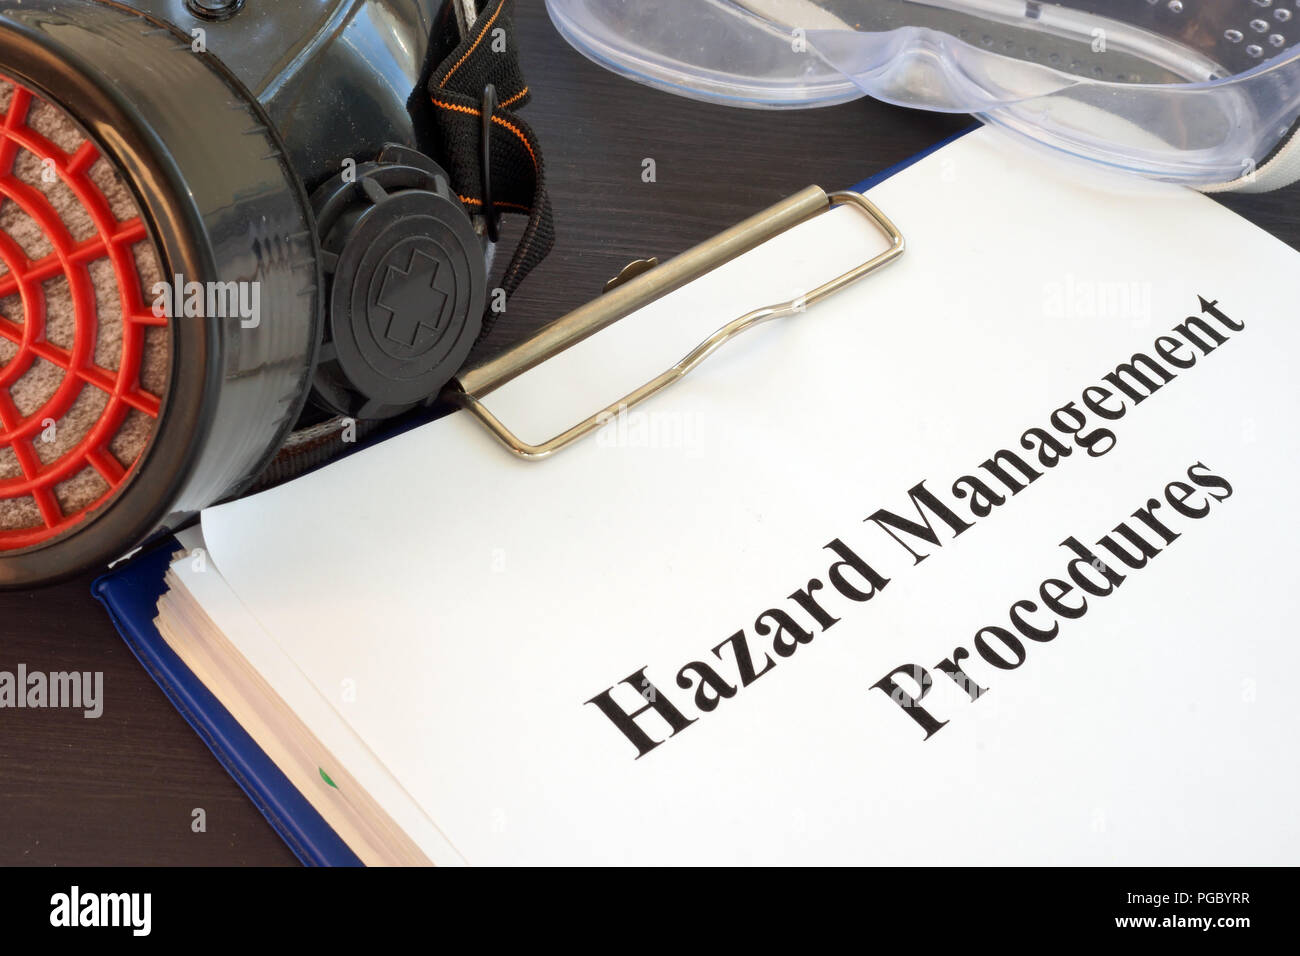 Clipboard with Hazard Management Procedures documents on the desk. Stock Photo